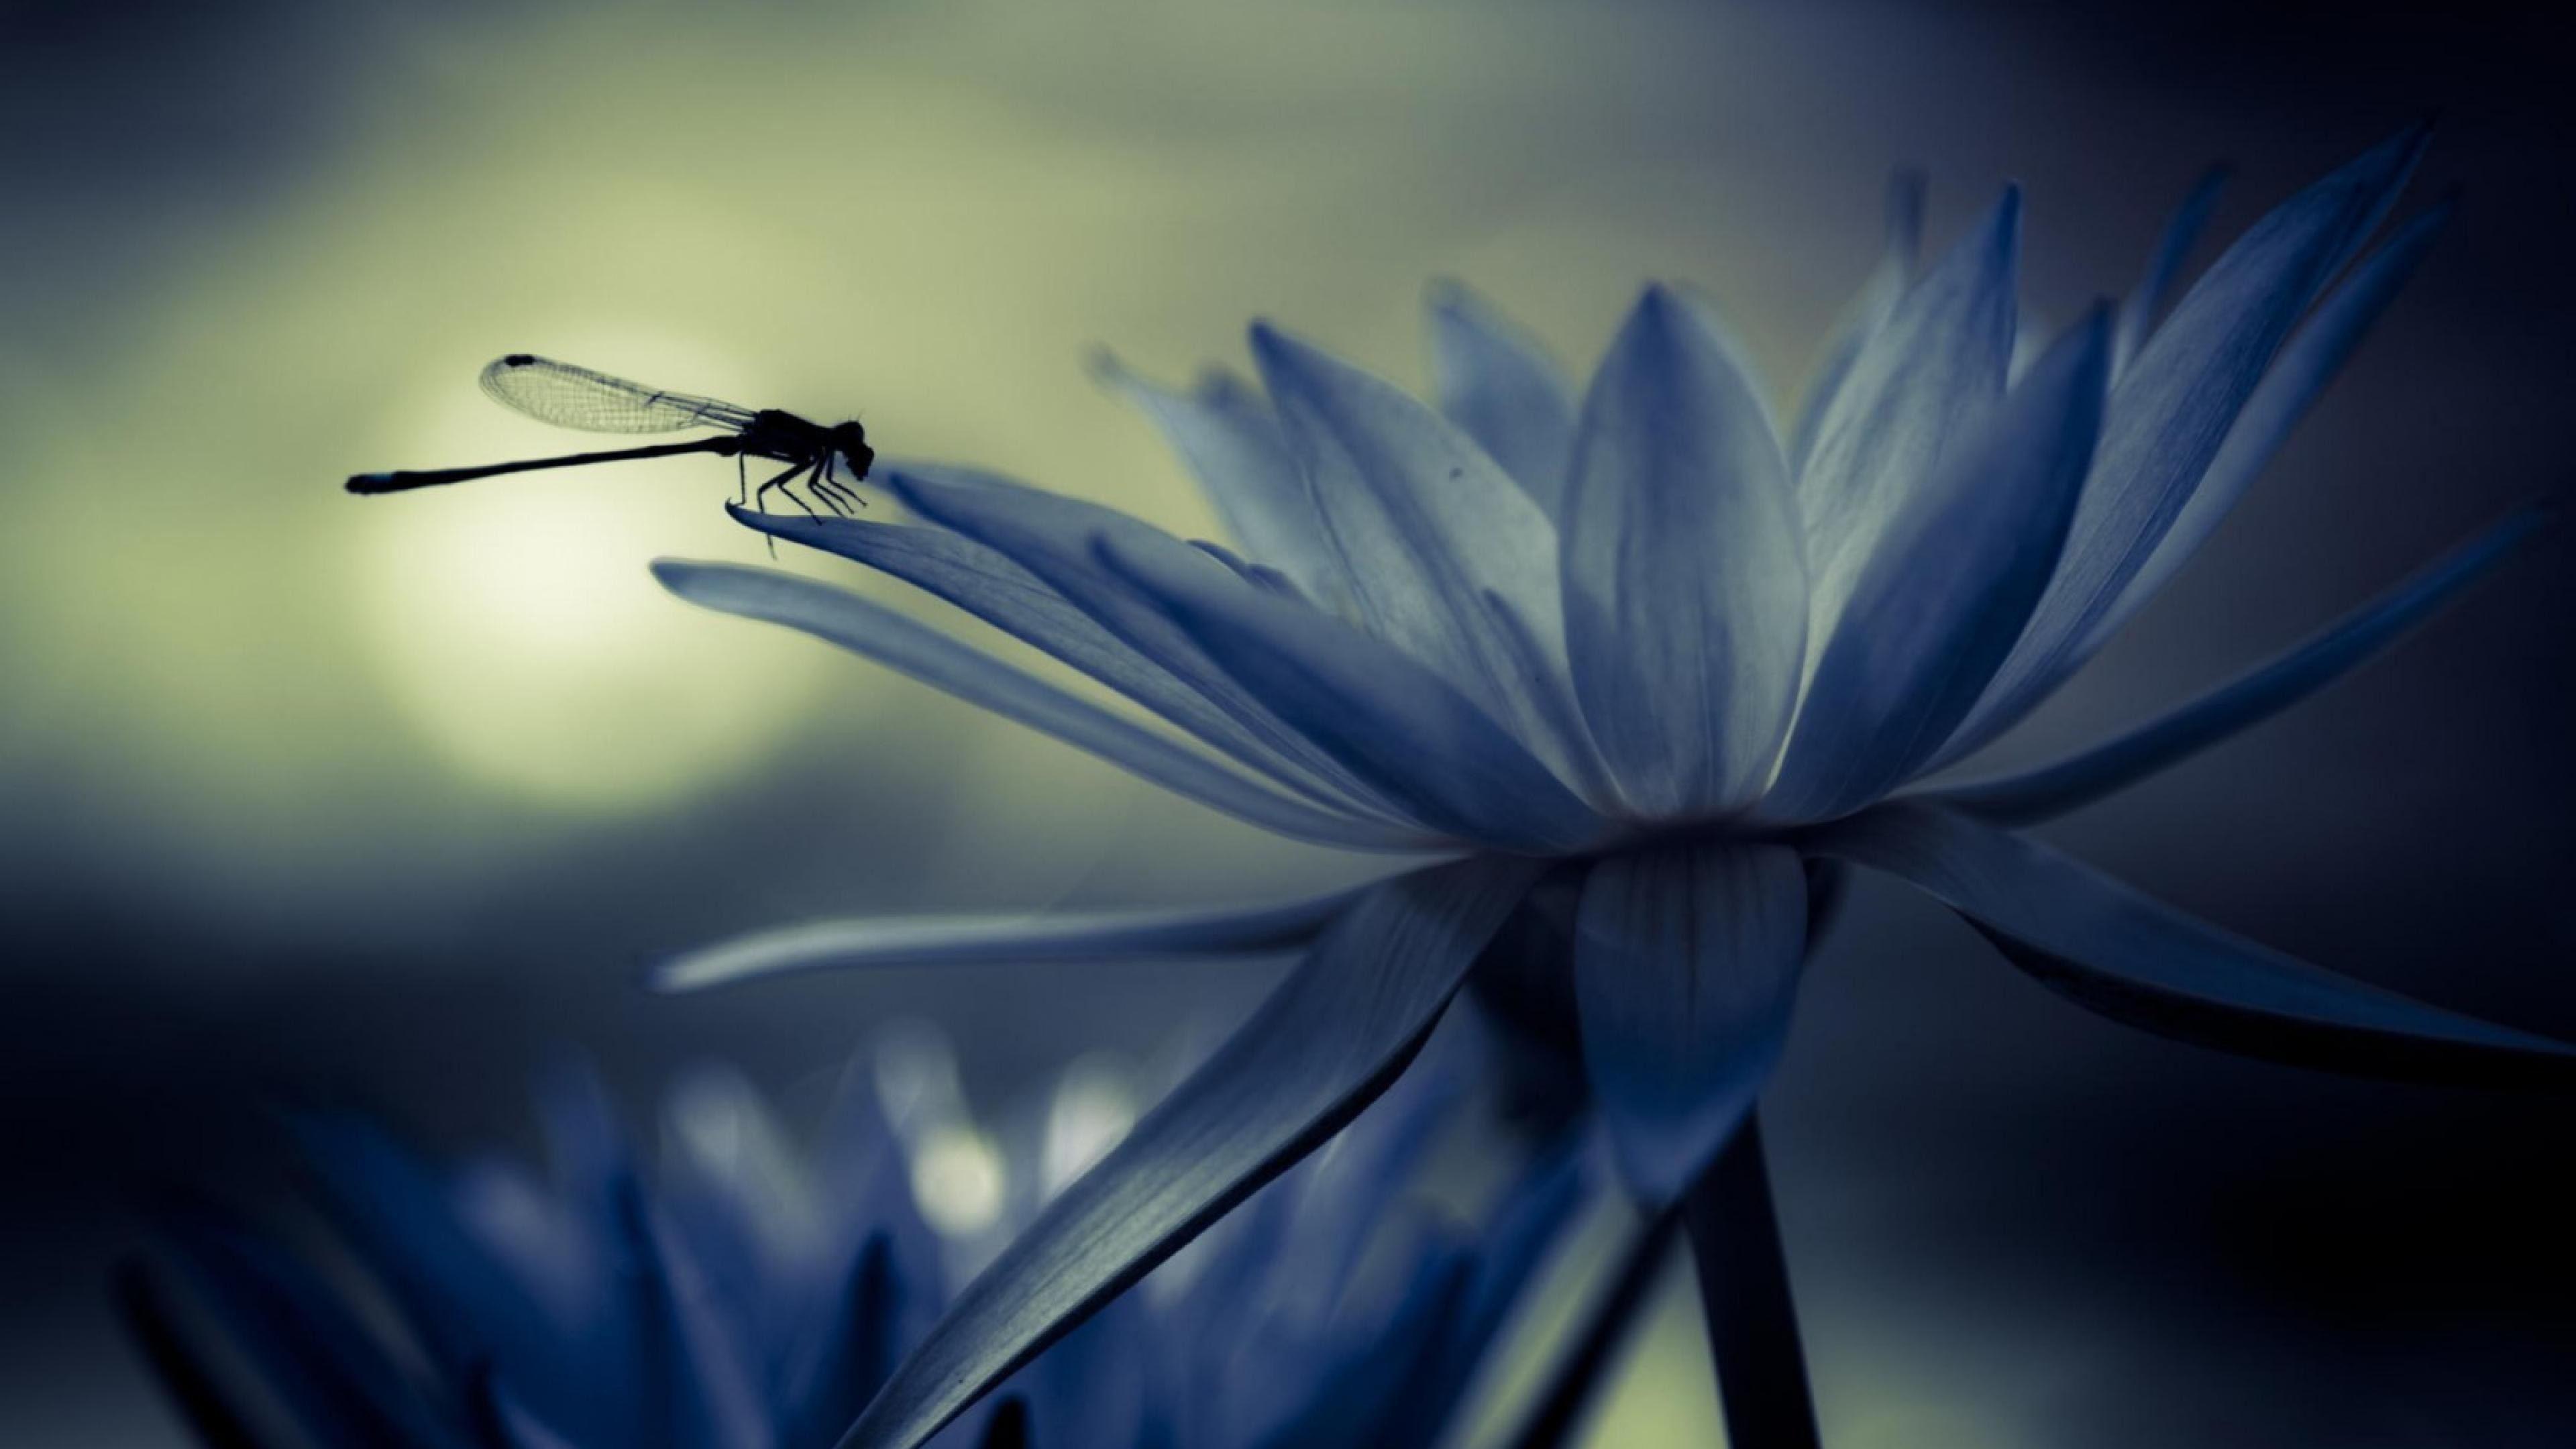 3840x2160 Dragonfly Backgrounds Free Download